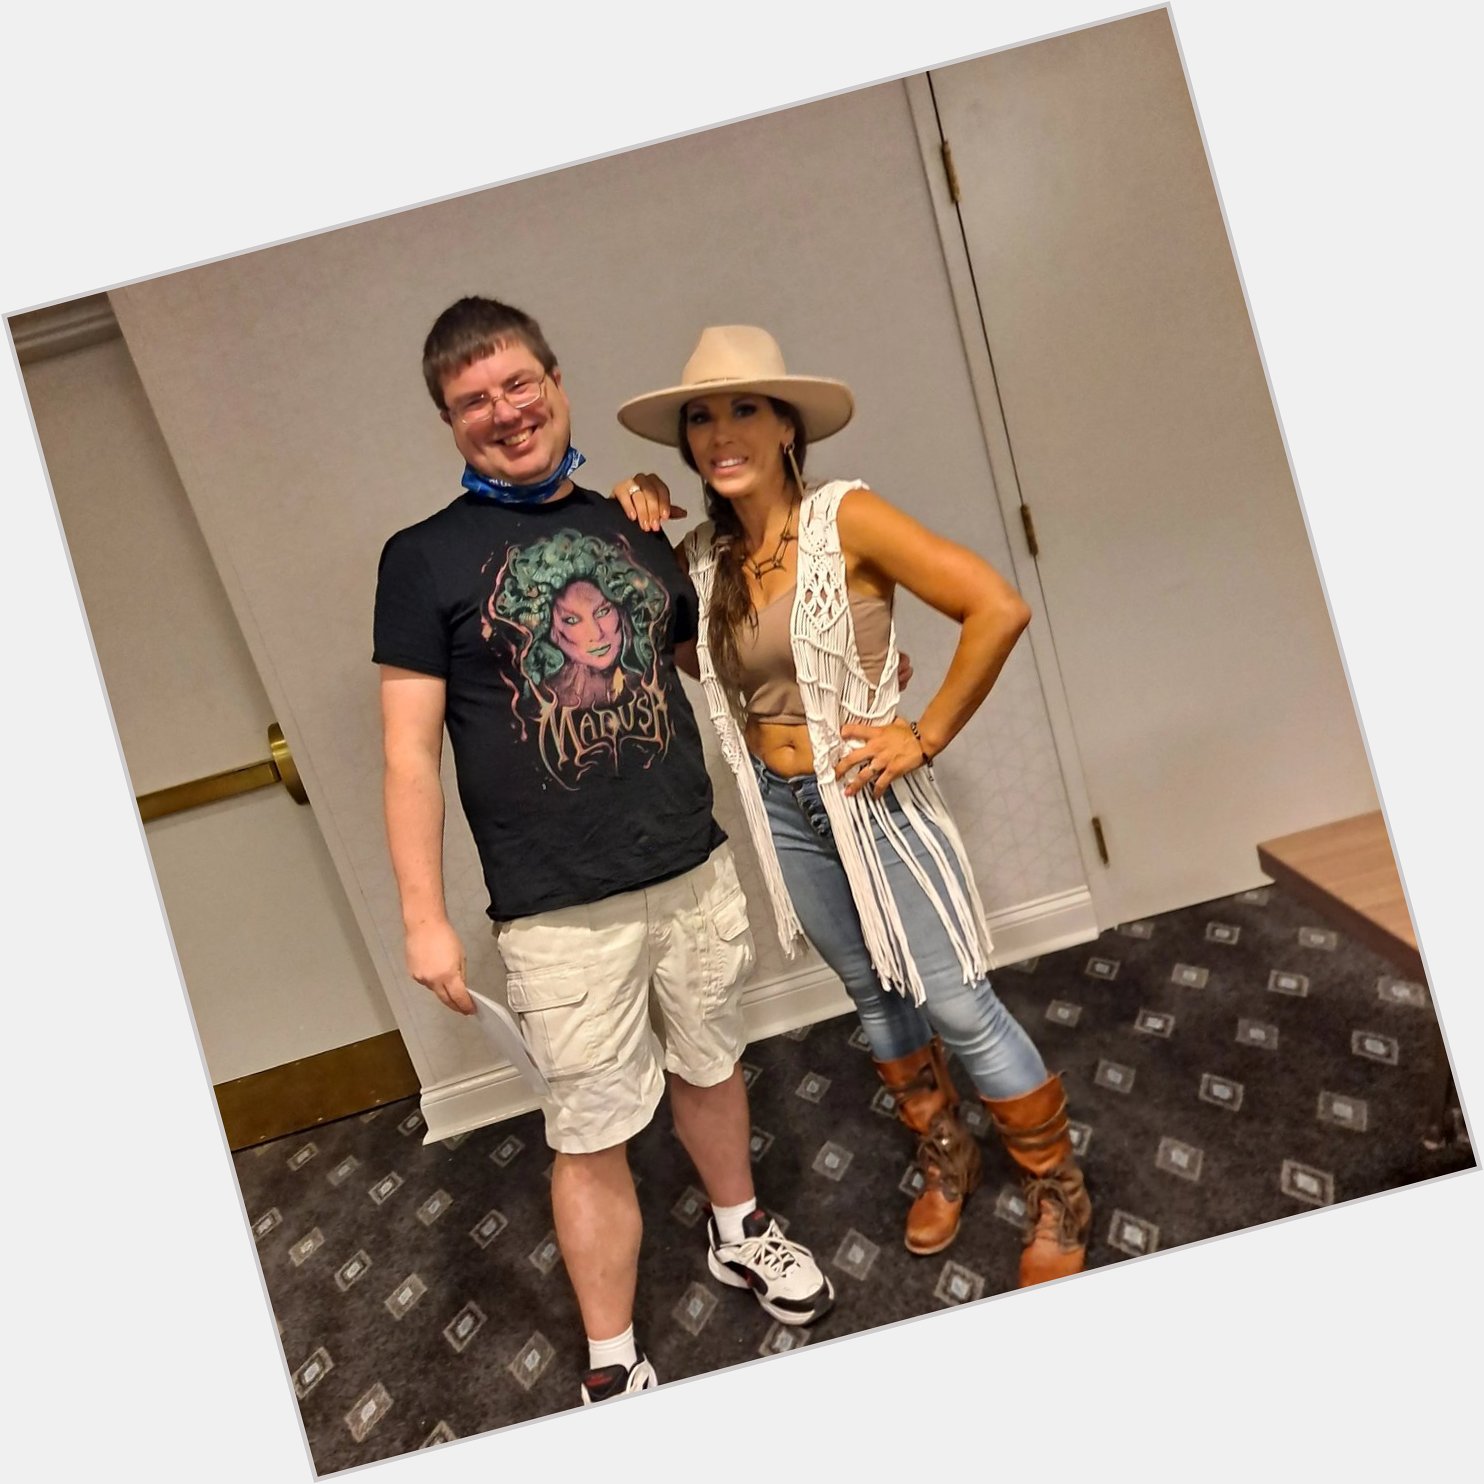 Happy Birthday Mickie James, honored to meet her over the weekend. 